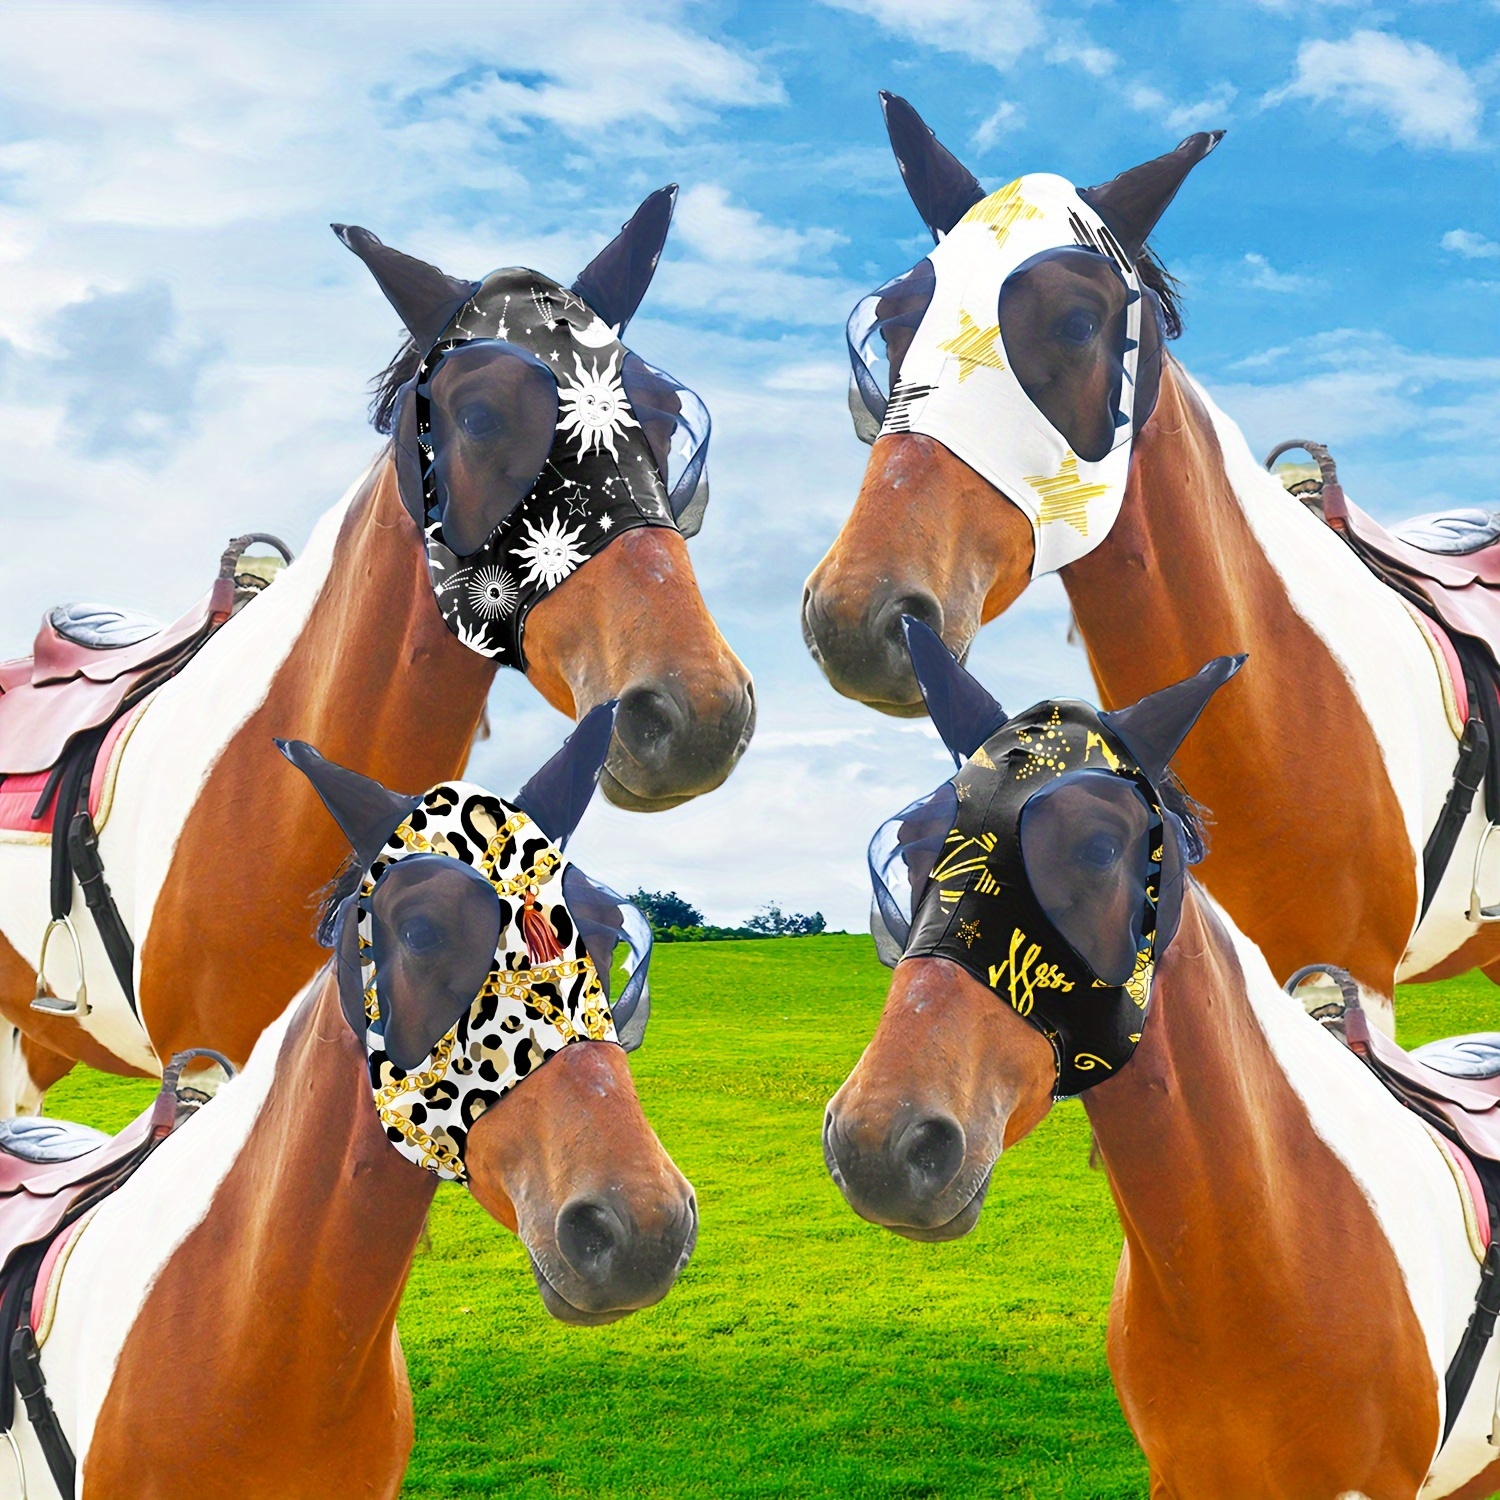 

4pcs Horse Fly Masks, Soft & Comfortable With Ears Elasticity, Full Face Protection, Large Size Equestrian Riding Gear